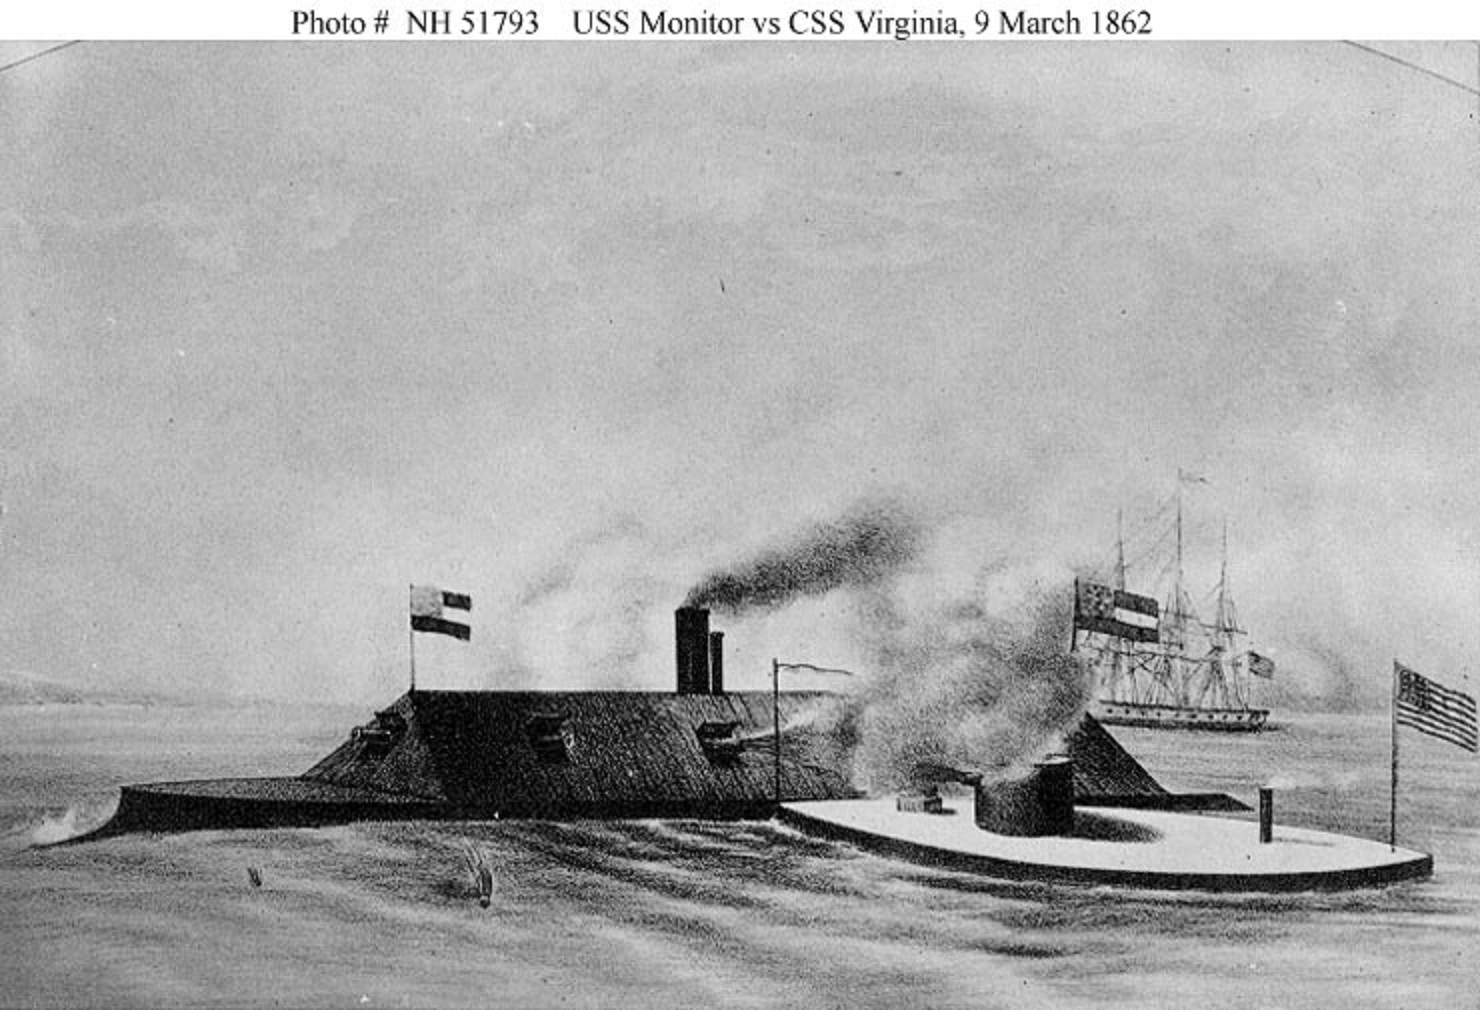 The Monitor engaging the larger CSS Virginia